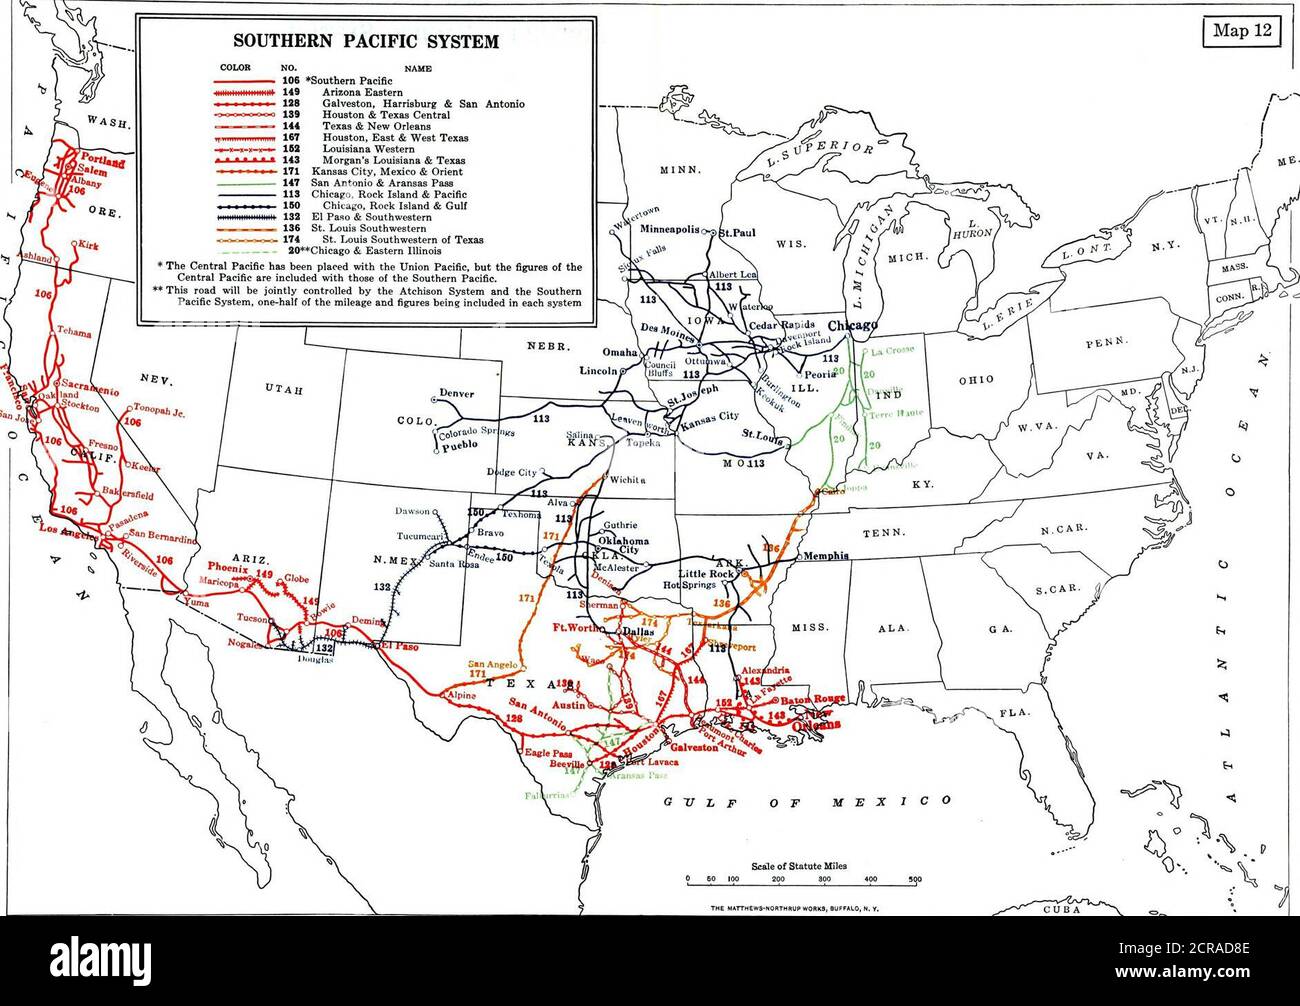 . A plan for railroad consolidations, including a discussion of their purpose and practicability . NO. NAME 107 Atchison. Topeka & Santa Fe 145 Northwestern Pacific 141 Panhandle & Santa Fe jiltiuiinitiiiiiiii 1-2® Gulf, Colorado & Santa Fe 20 ^Chicago & Eastern Illinois ,1,.,,^,,. , 123 Texas & Pacific 123a New Orleans, Texas & Mexico „ Hr.ifiim; 1236 St. Louis, Brownsville & Mexico ,^ ^^  ^^.^^,^^ 134 International & Great Northern   ^,^^^  ^ 119 Missouri Pacific 117 St. Louis, Iron Mountain & Southern ■ ♦♦MM* * This road will be jointly controlled by the Atchison System and the Southern Pac Stock Photo